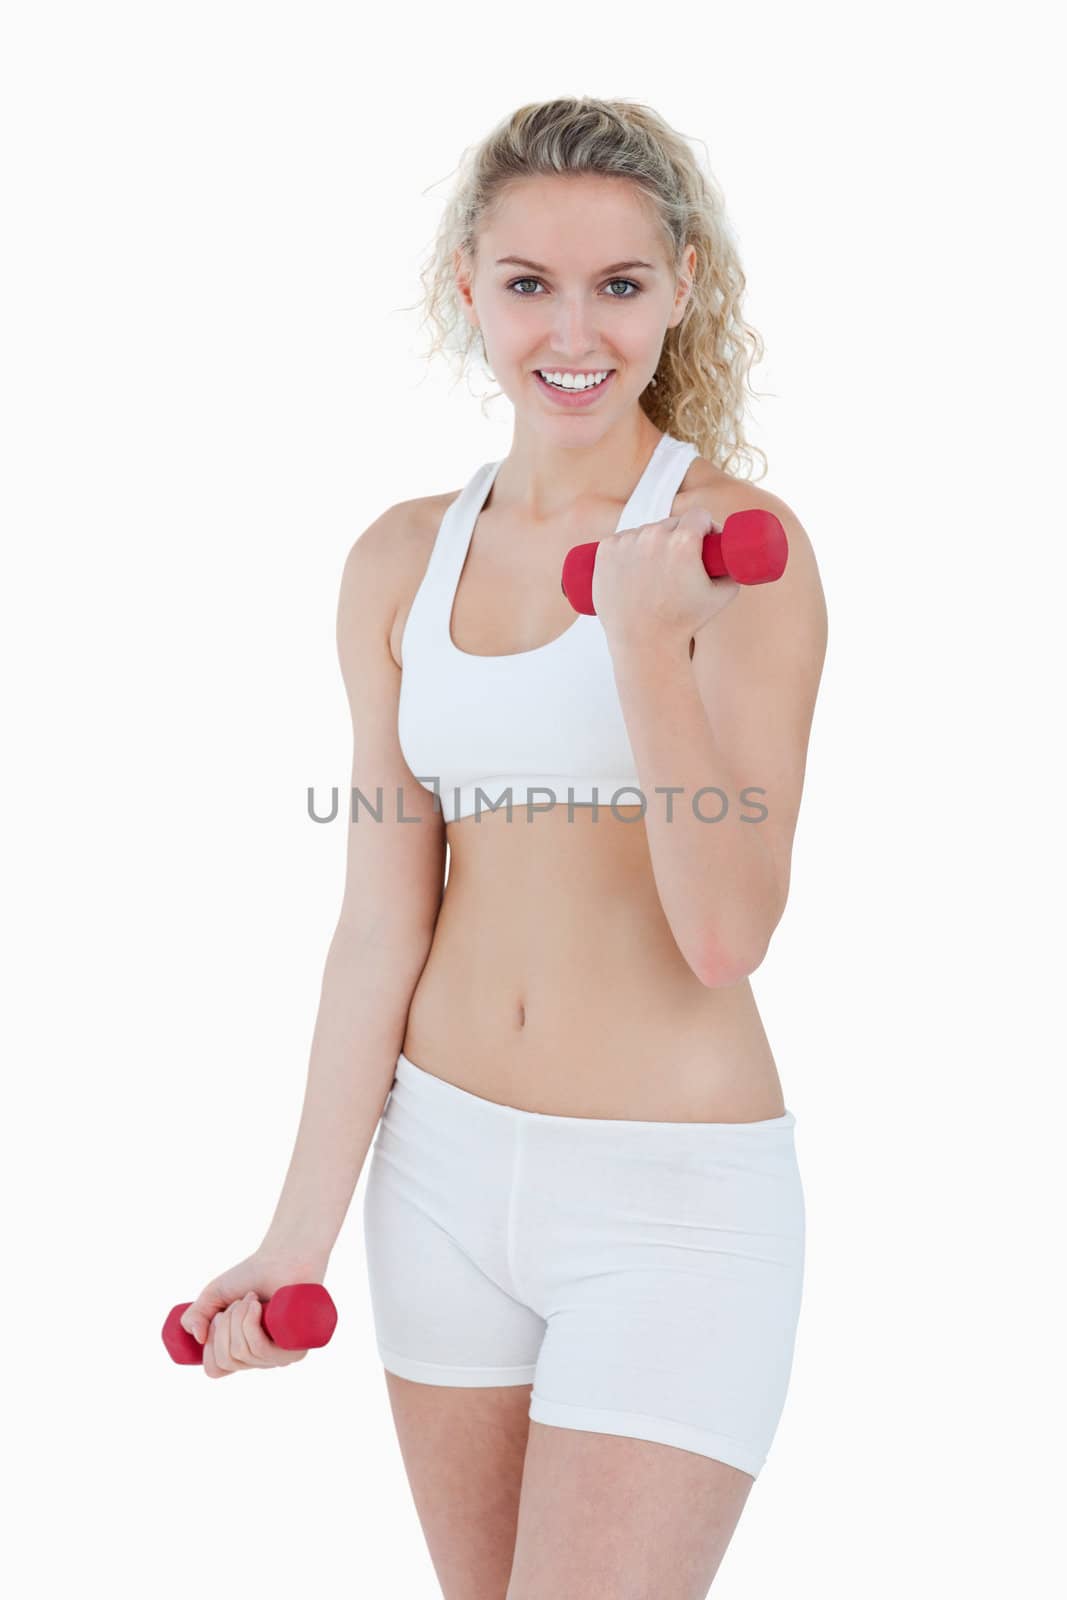 Young woman looking at the camera while lifting weights against a white background